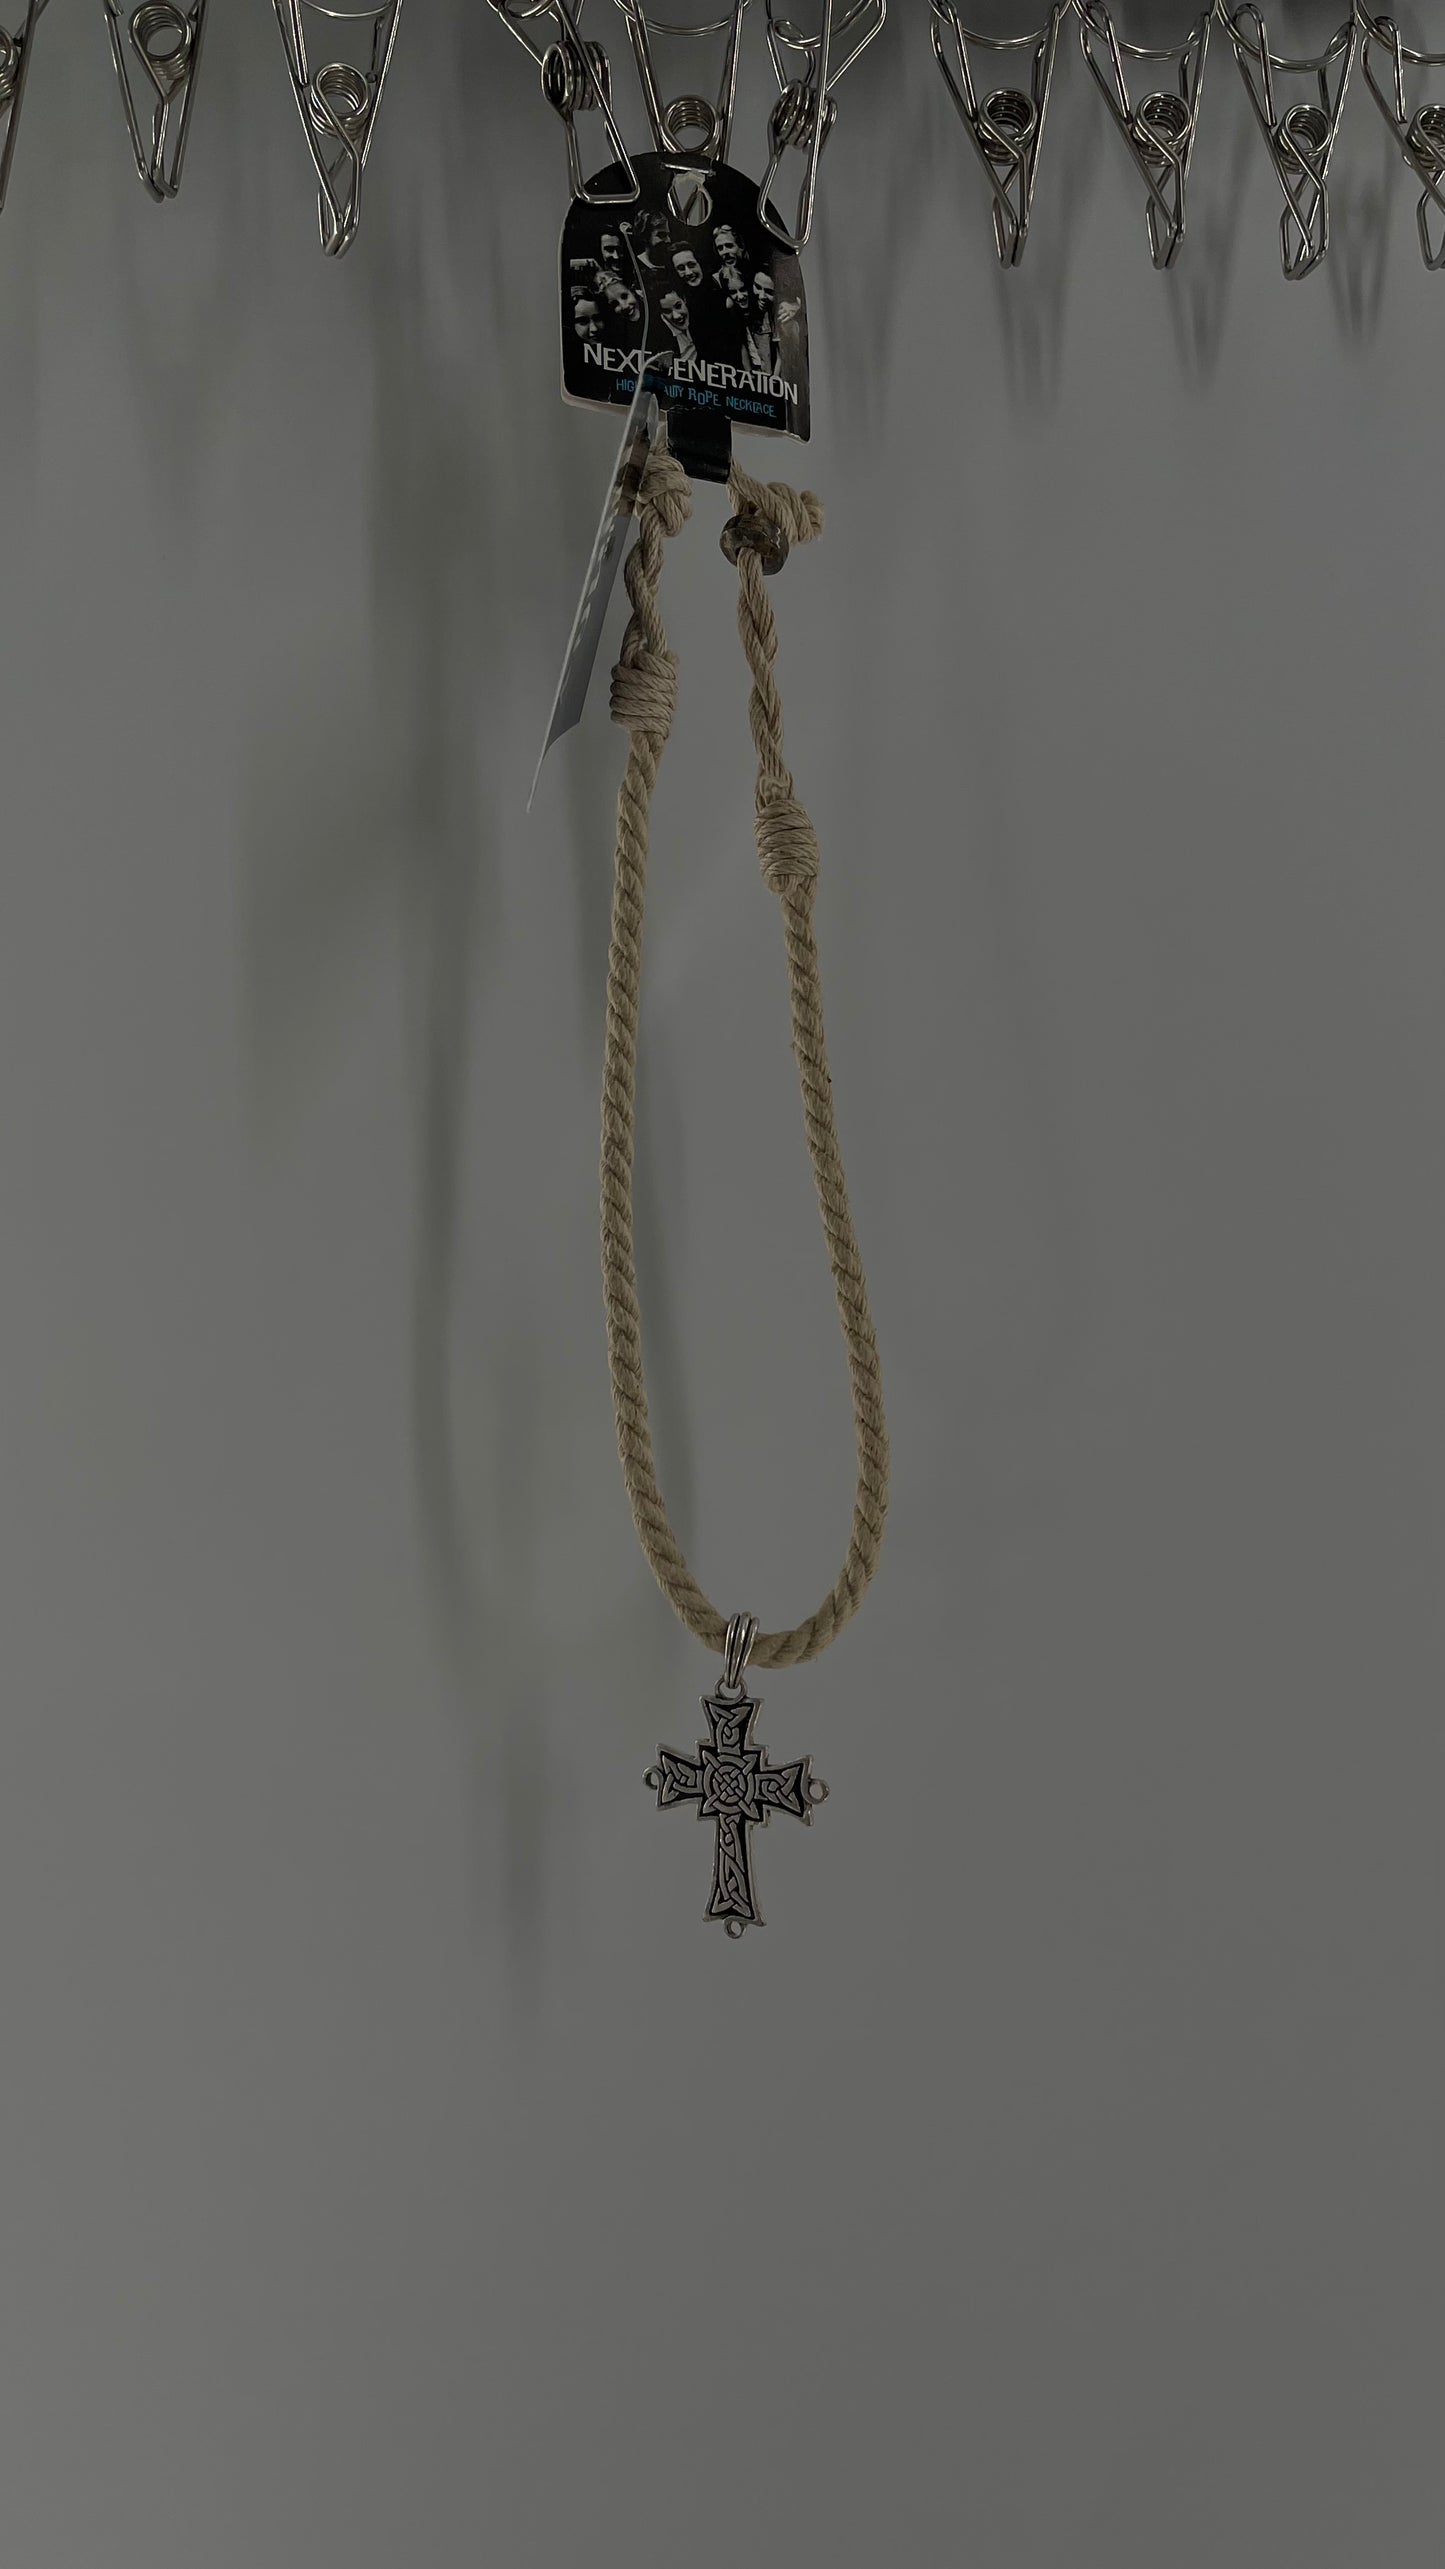 90s Next Generation Rope Necklace with Silver Engraved Cross